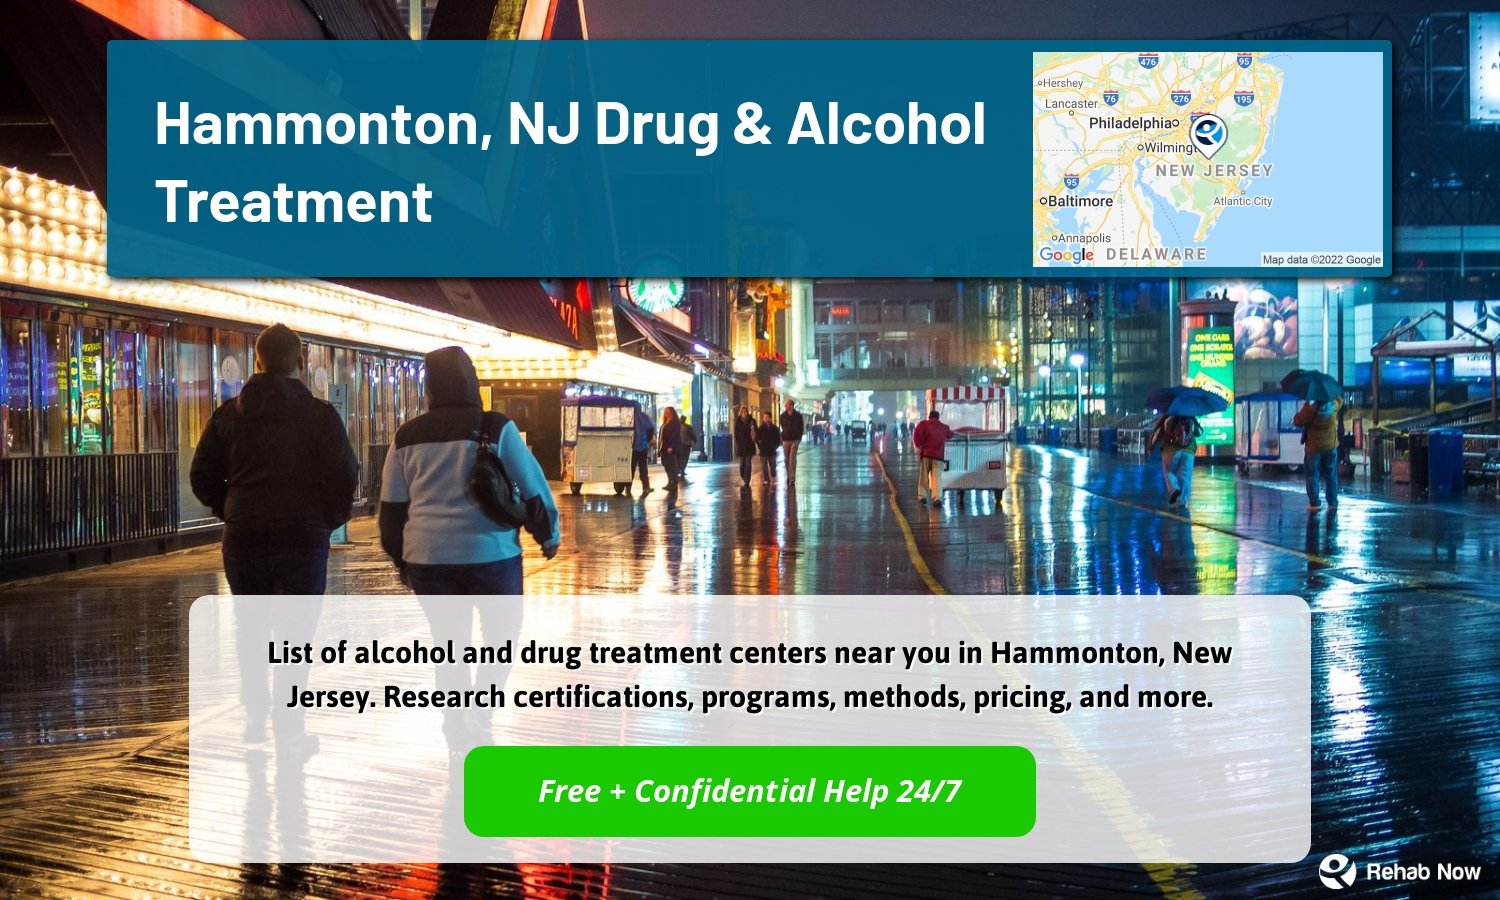 List of alcohol and drug treatment centers near you in Hammonton, New Jersey. Research certifications, programs, methods, pricing, and more.